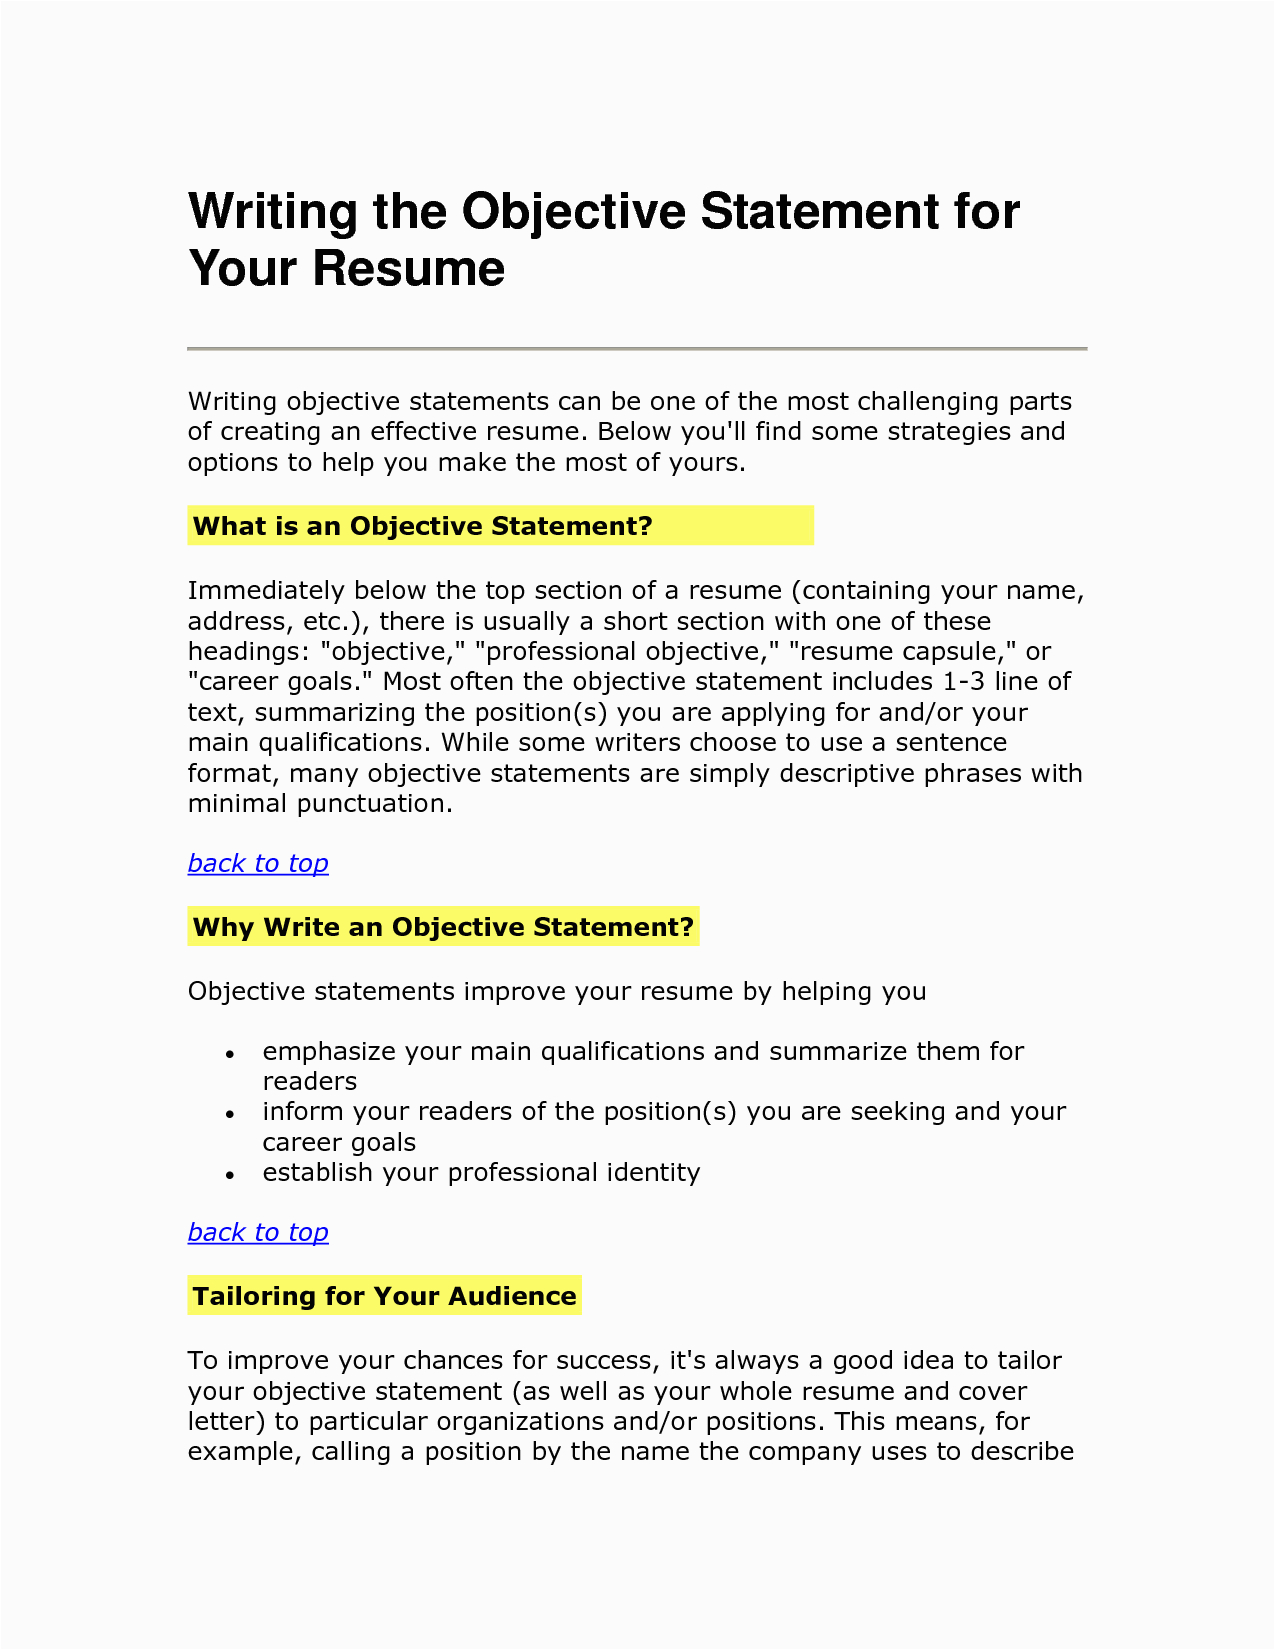 Sample Of A Resume Objective Statement Resume Objective Statement